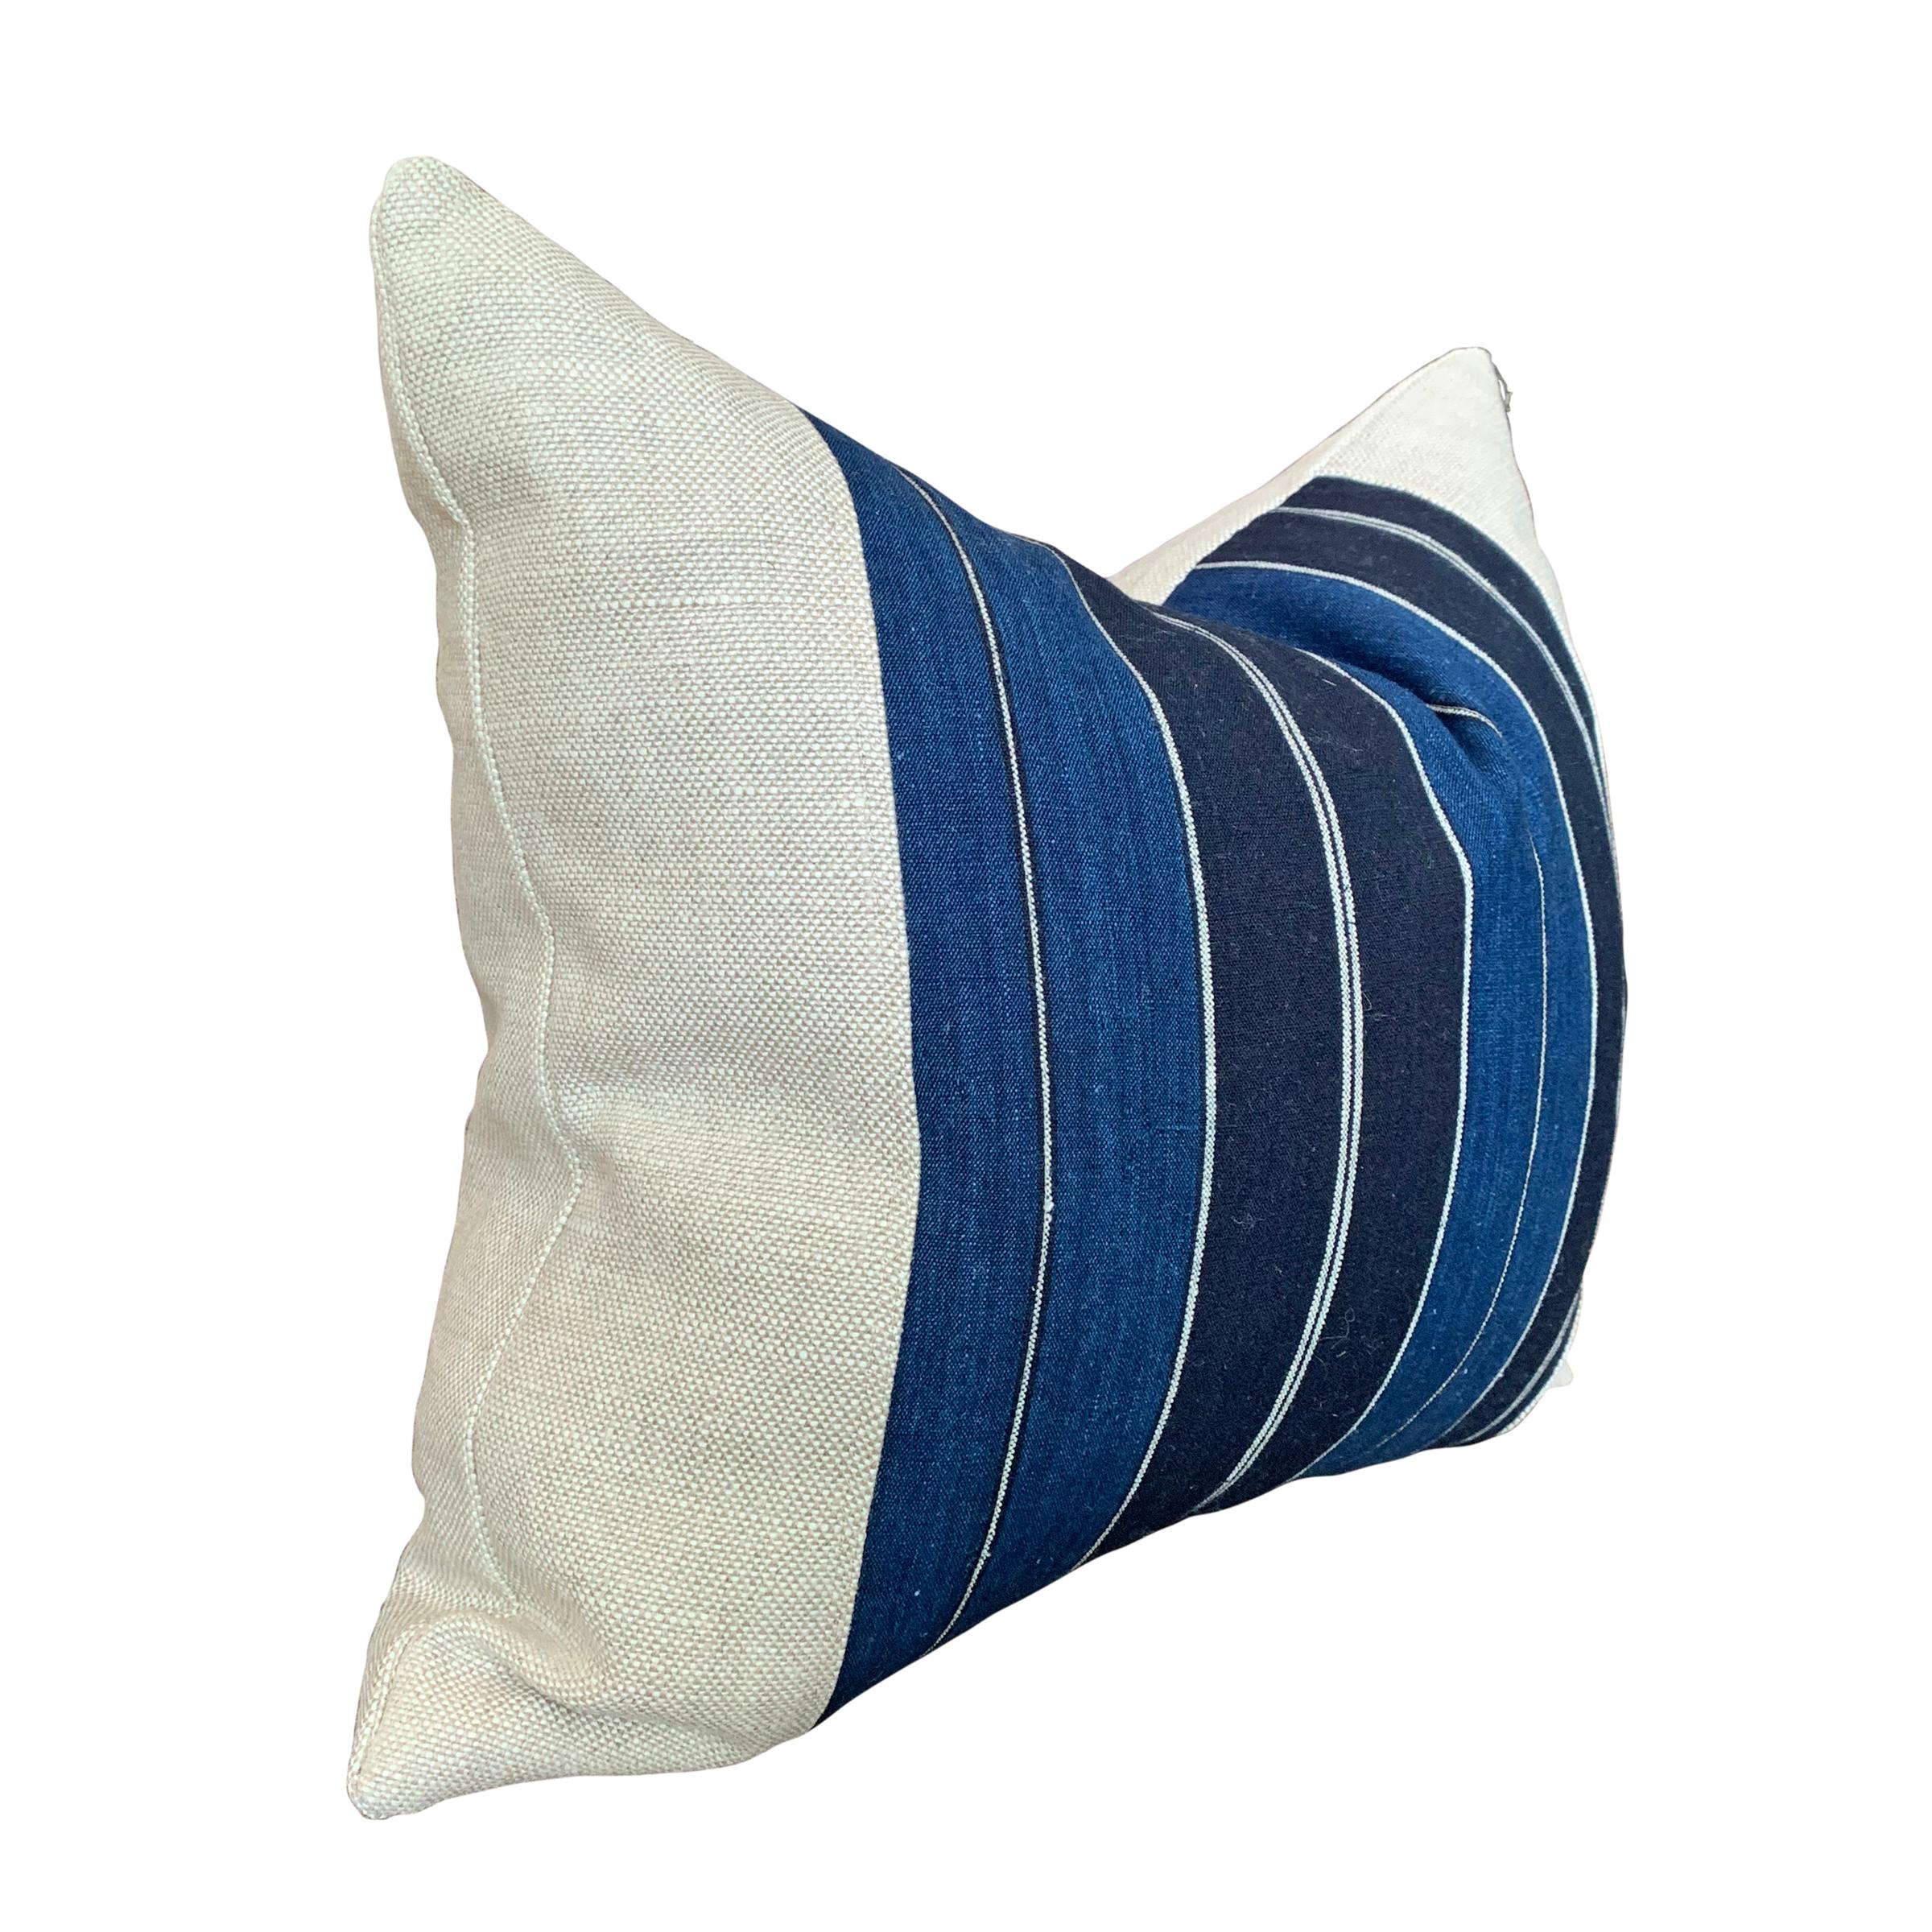 A wonderful newly-made pillow constructed from a vintage Japanese striped indigo dyed panel, backed with linen, and filled with down.